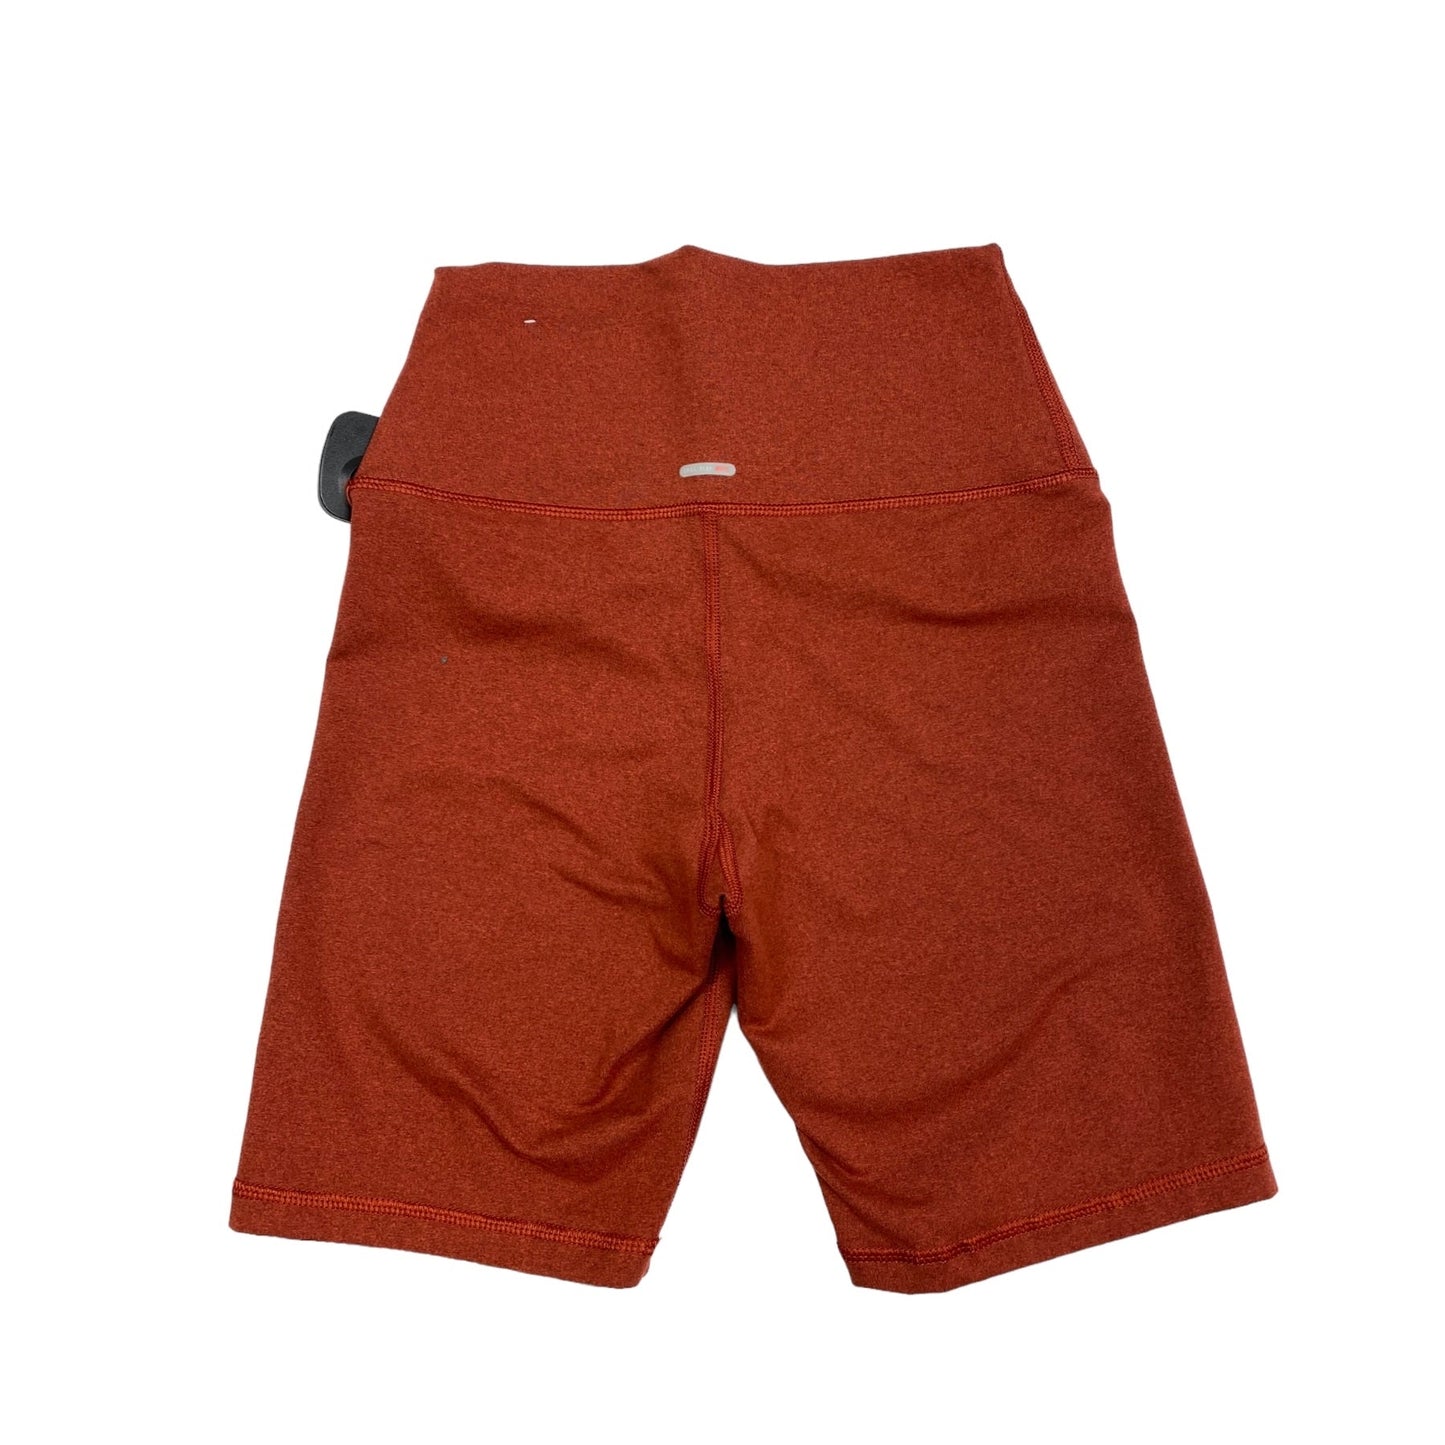 Red Athletic Shorts Aerie, Size S